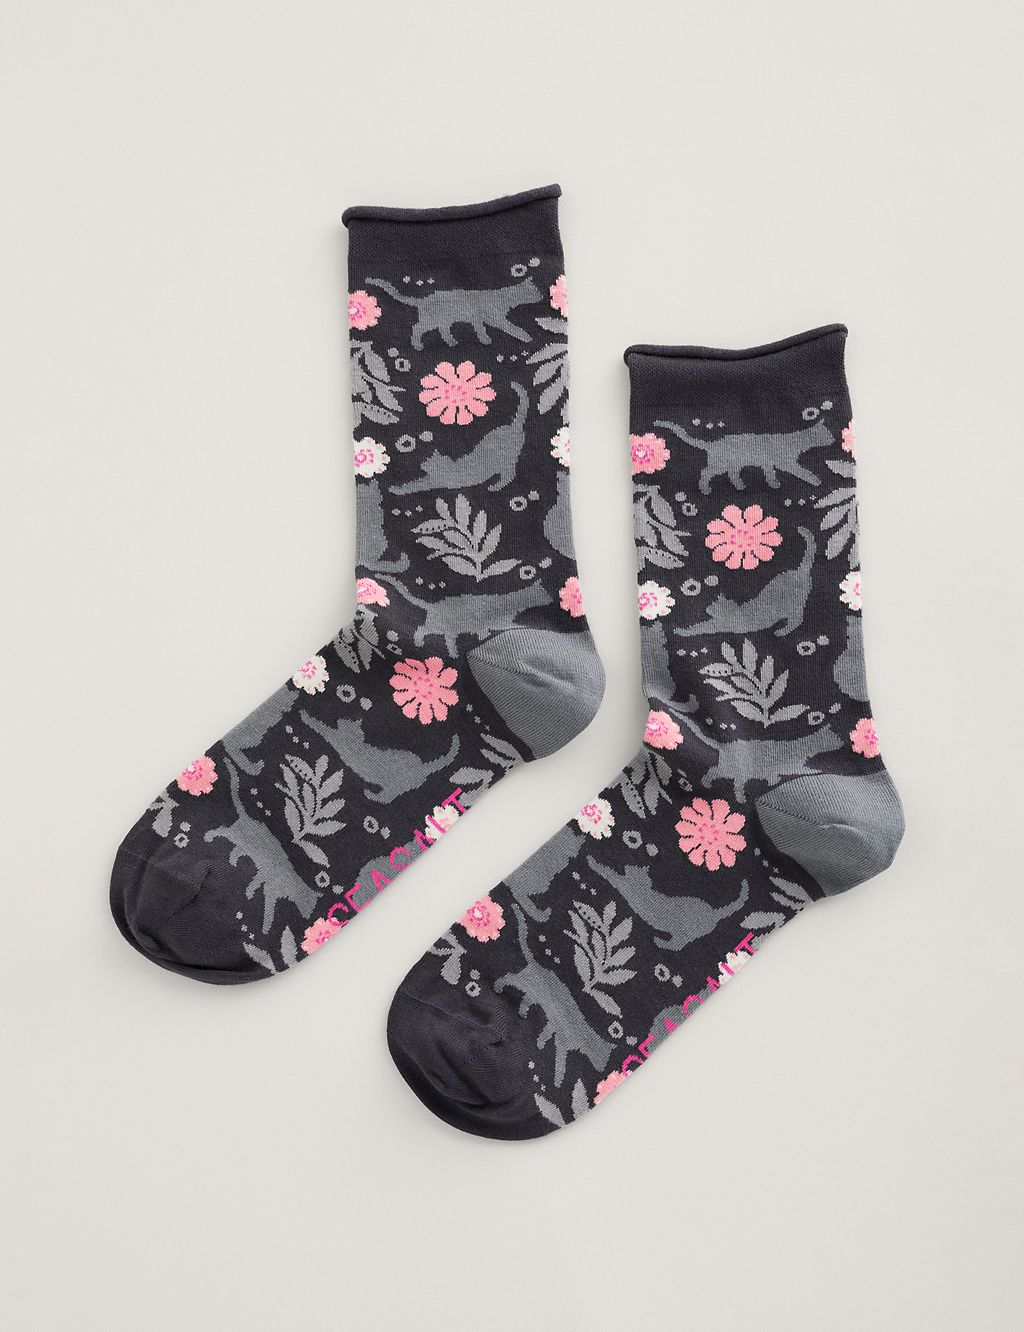 Cat and Floral Ankle High Socks 1 of 1